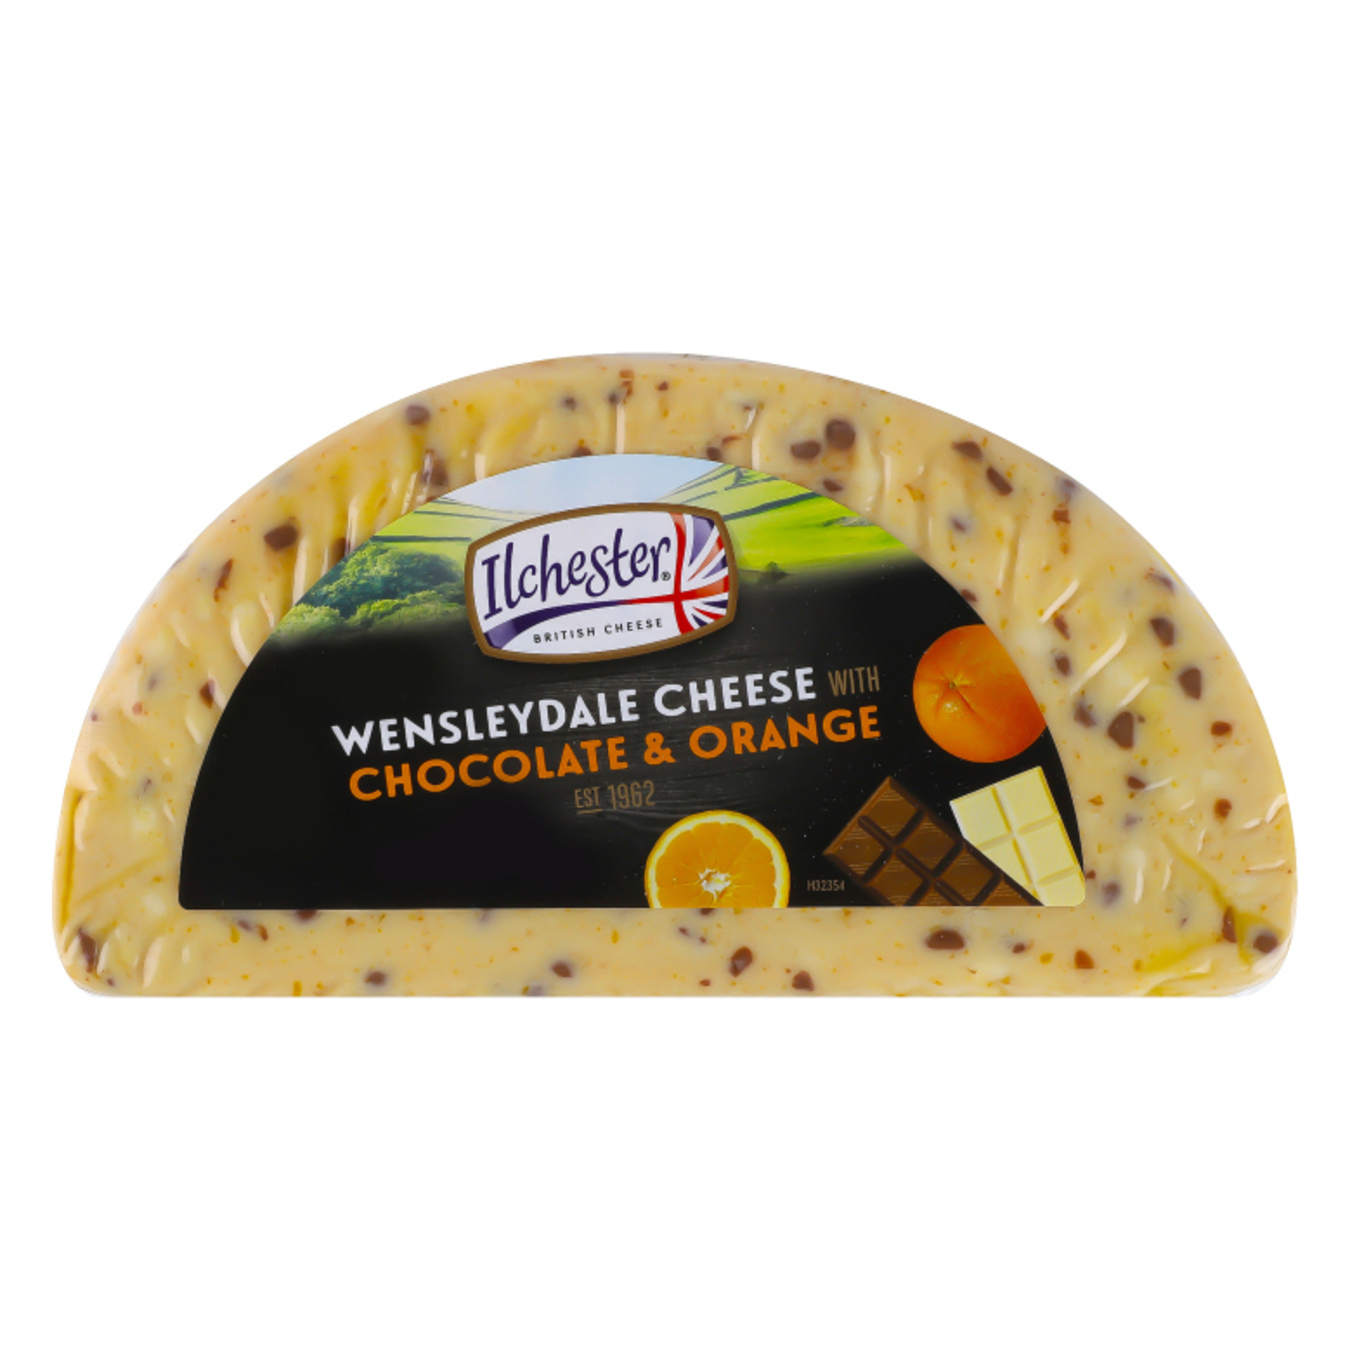 ILCHESTER English cheese with chocolate and orange 42% weight